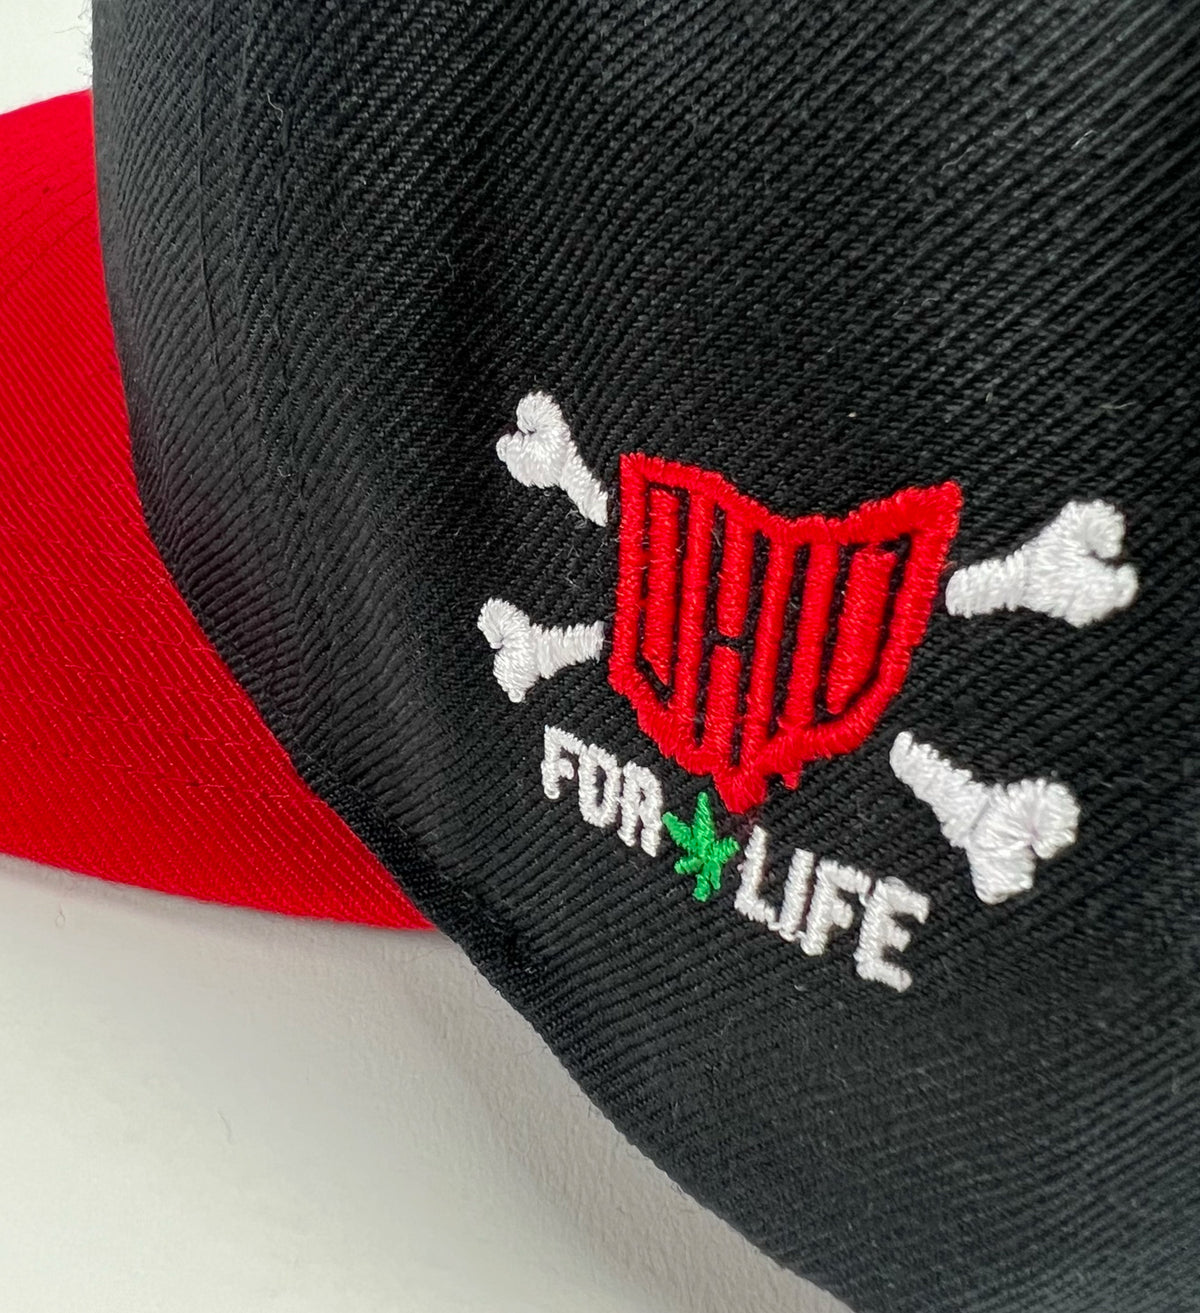 Ohio For Life Black/Red Snapback